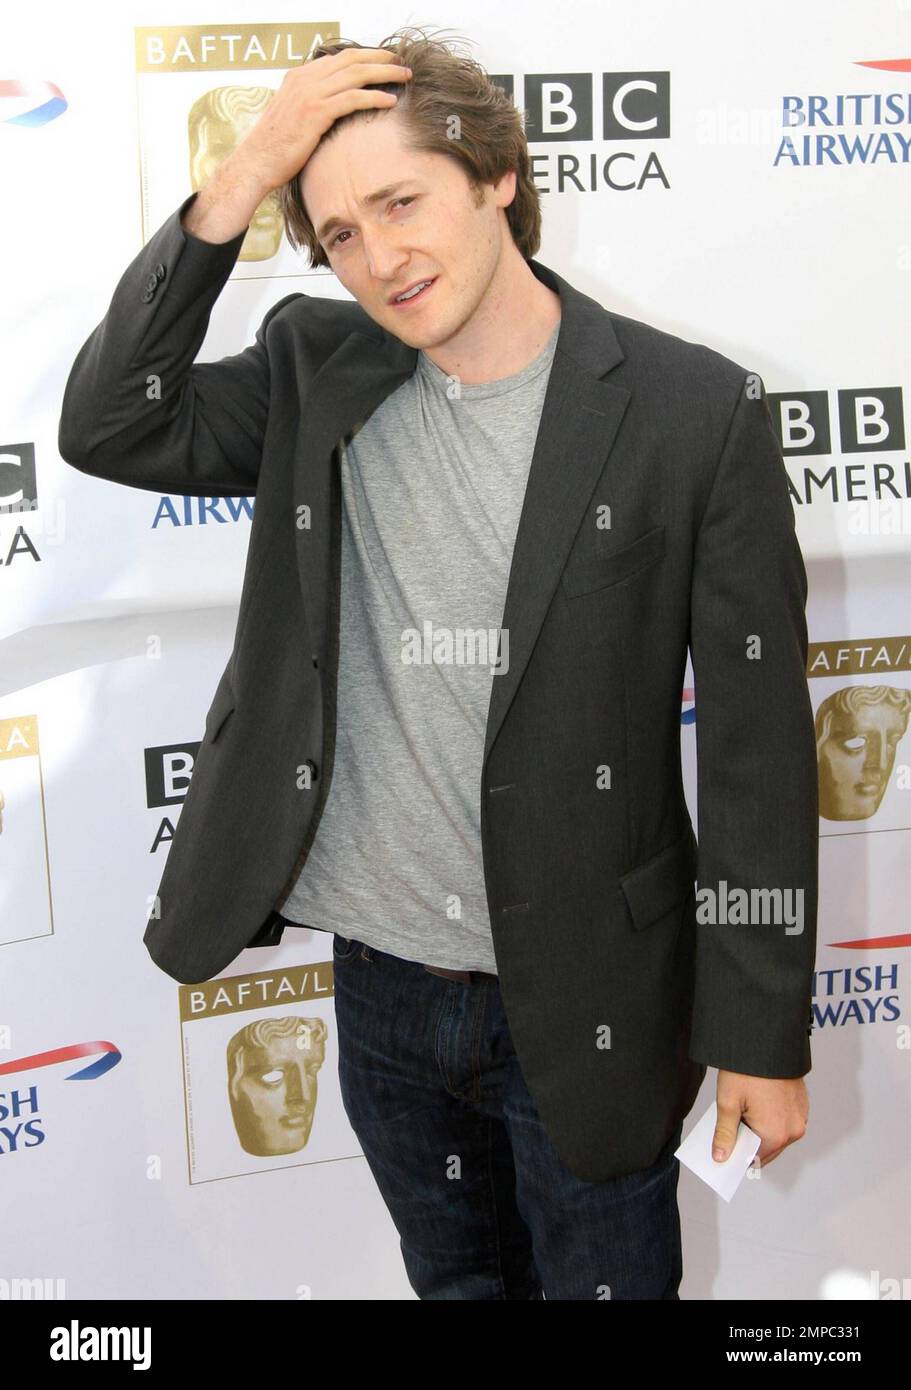 Lucas Neff walks the red carpet for the 8th Annual BAFTA/LA TV Tea Party held at the Hyatt Regency Hotel.  The annual party is hosted by The British Academy of Film and Television Arts to honor this year's US Emmy Award nominees. Los Angeles, CA. 08/28/10. Stock Photo